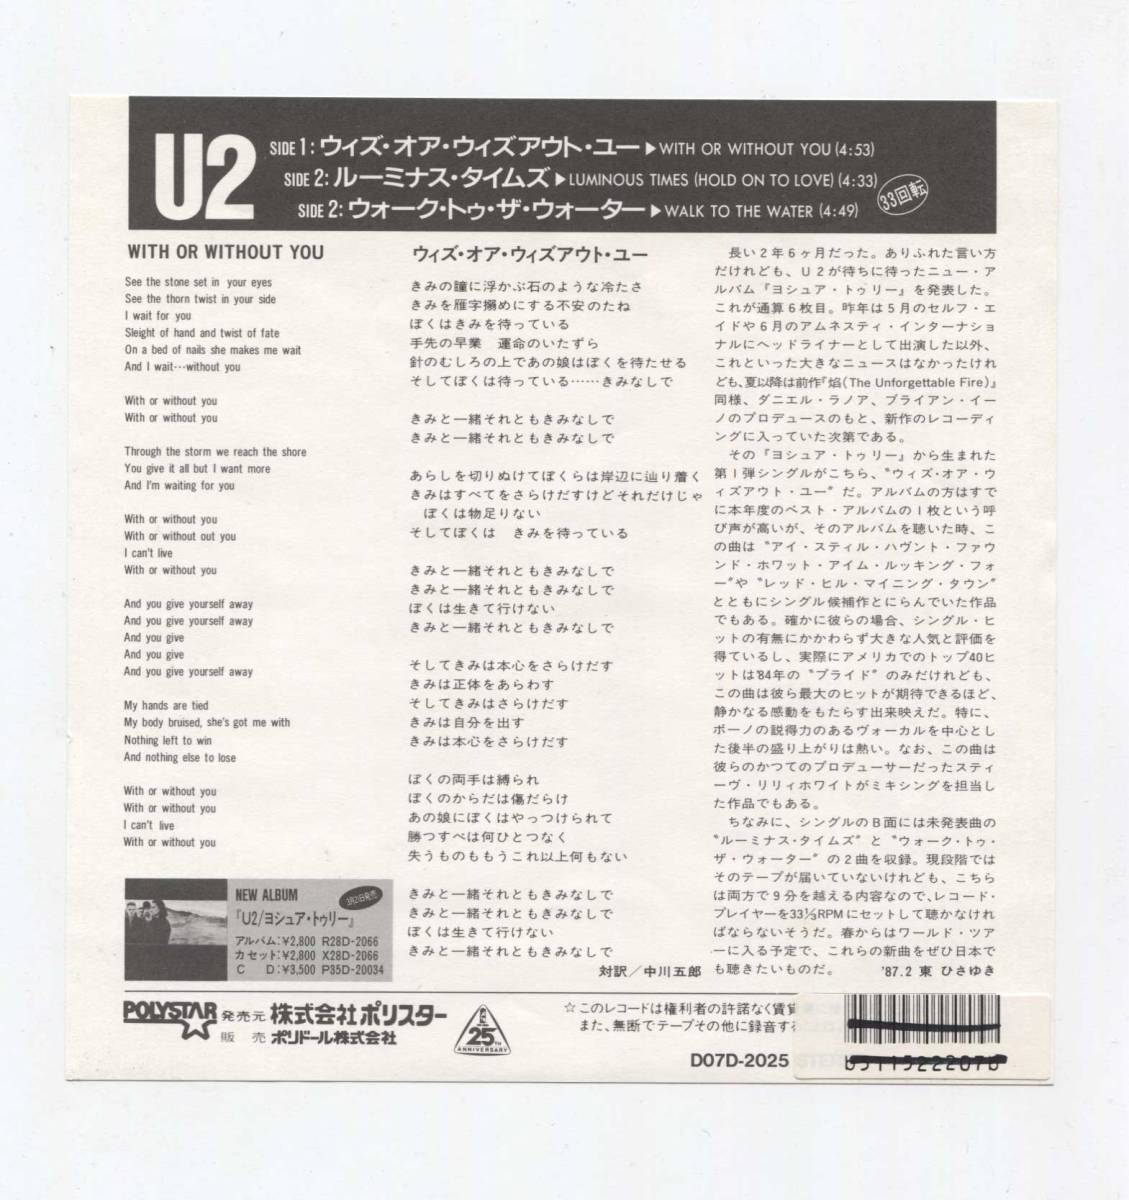 EP レコード シングル 同梱歓迎】 U2 □ WITH OR WITHOUT YOU □ 国内